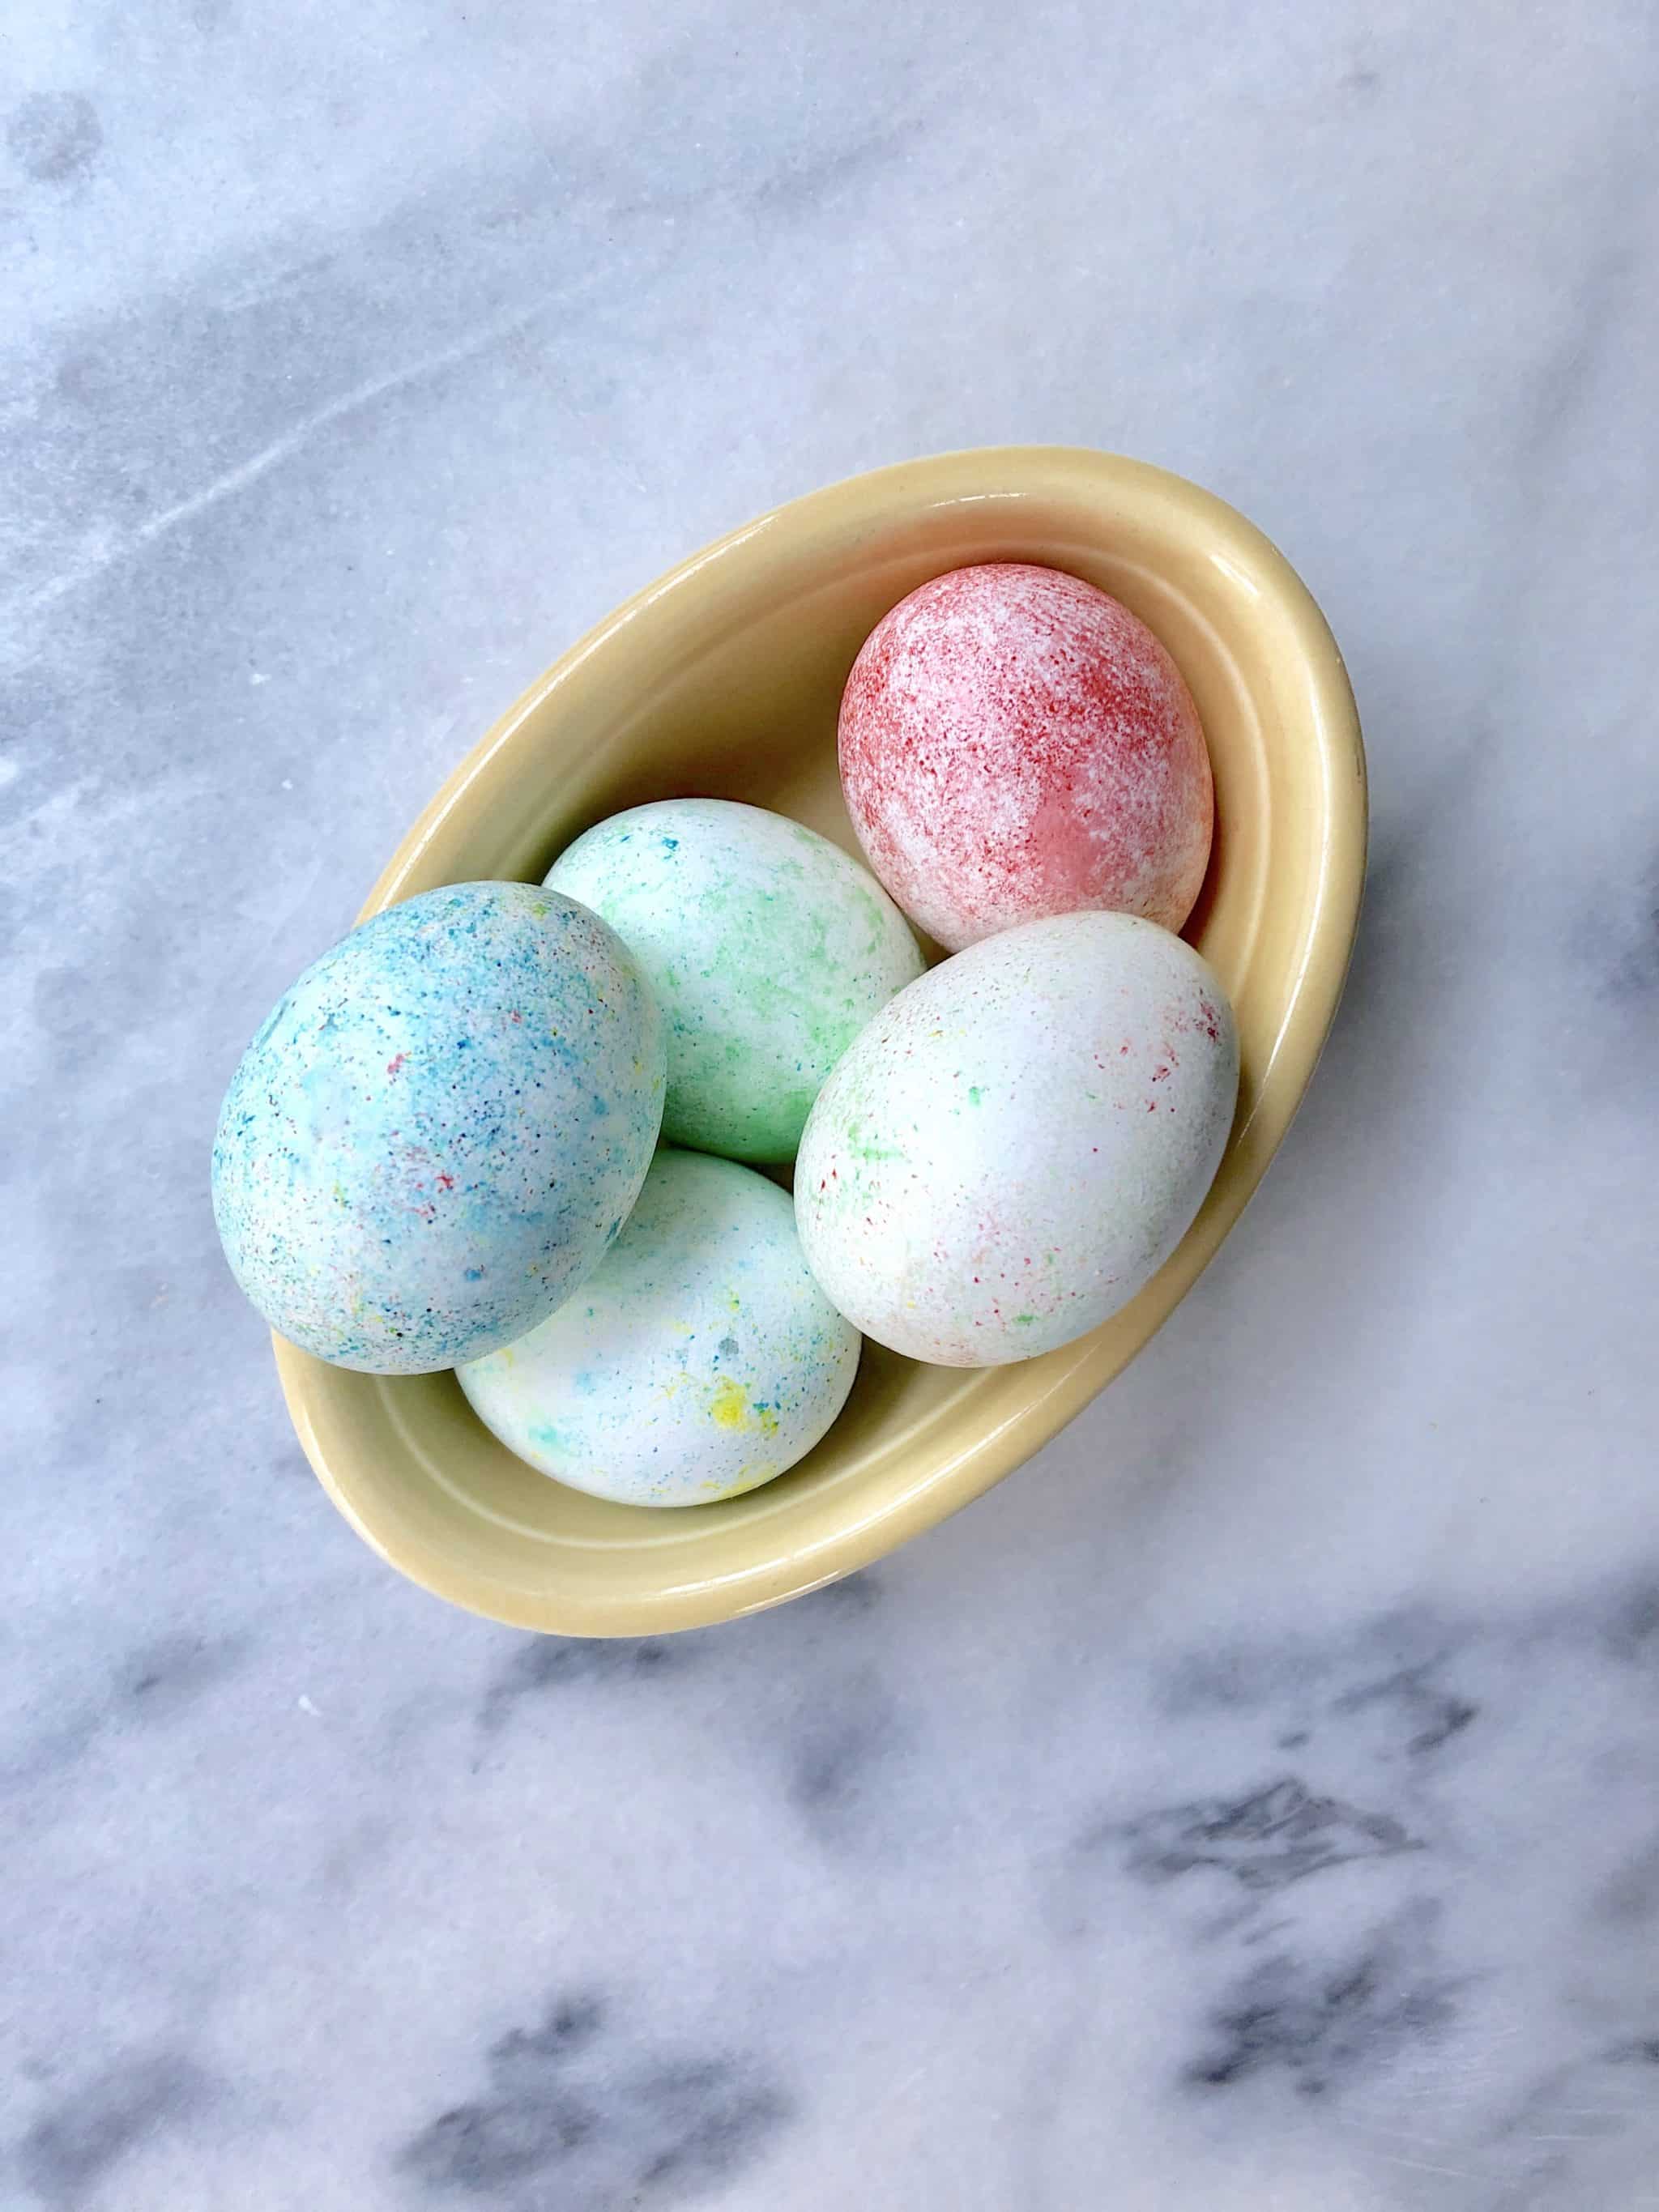 Rice Dyed Easter Eggs Food Coloring | Hill City Bride DIY Project Blog